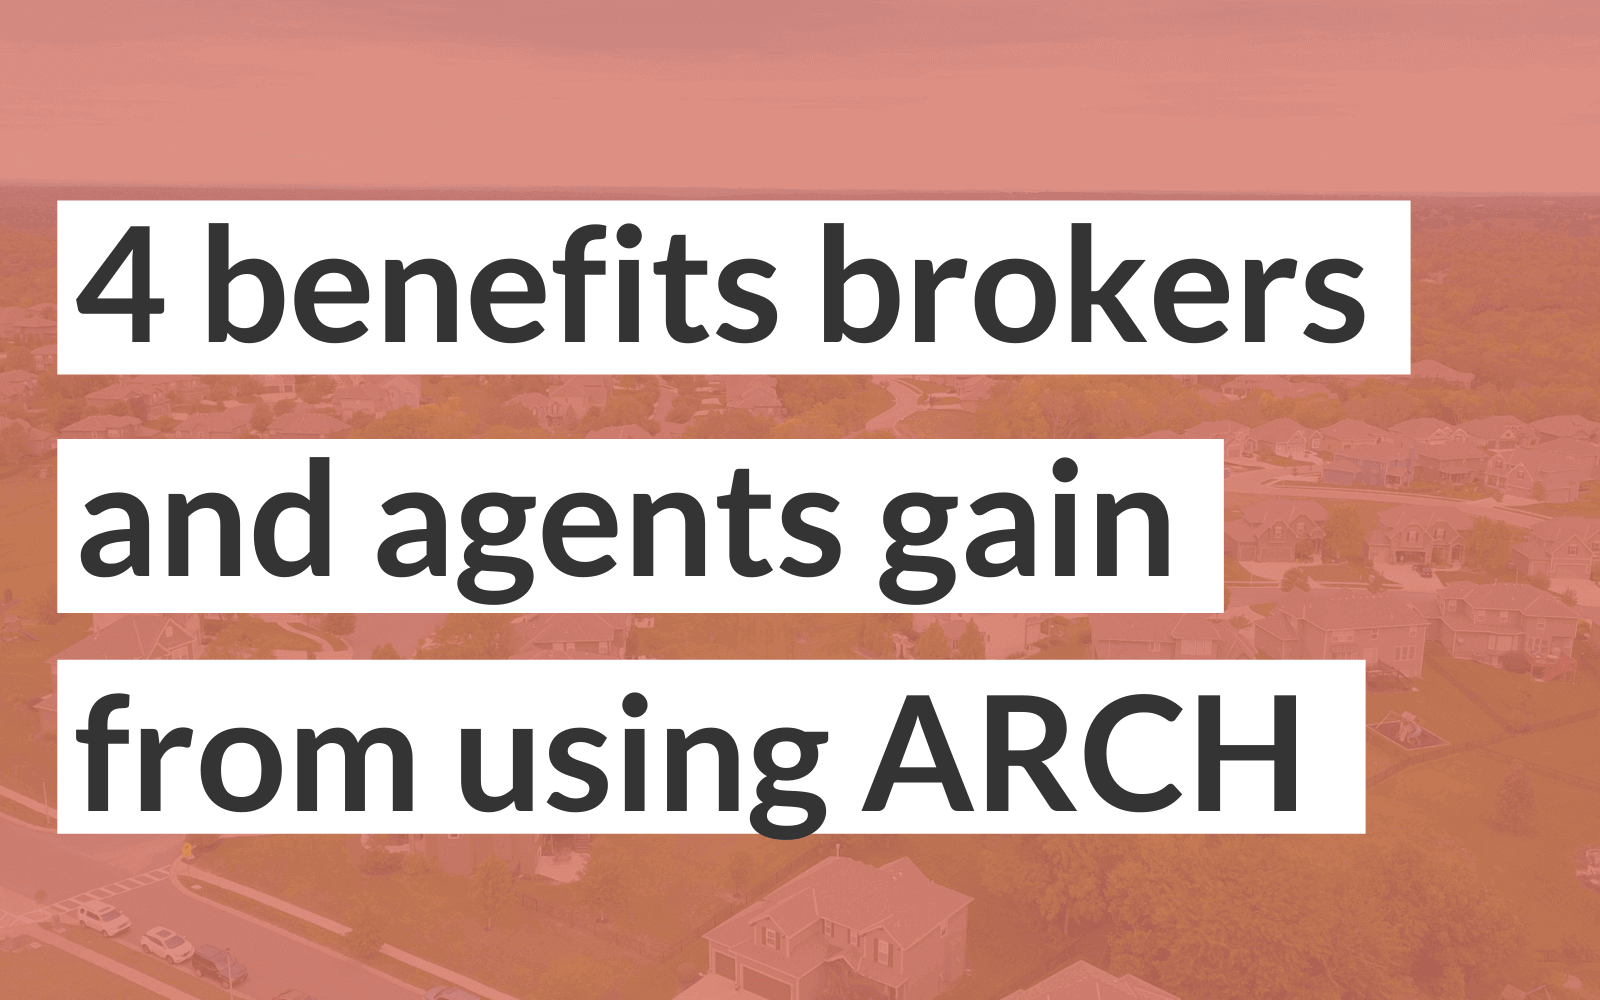 4 benefits brokers and agents gain from using ARCH down payment program